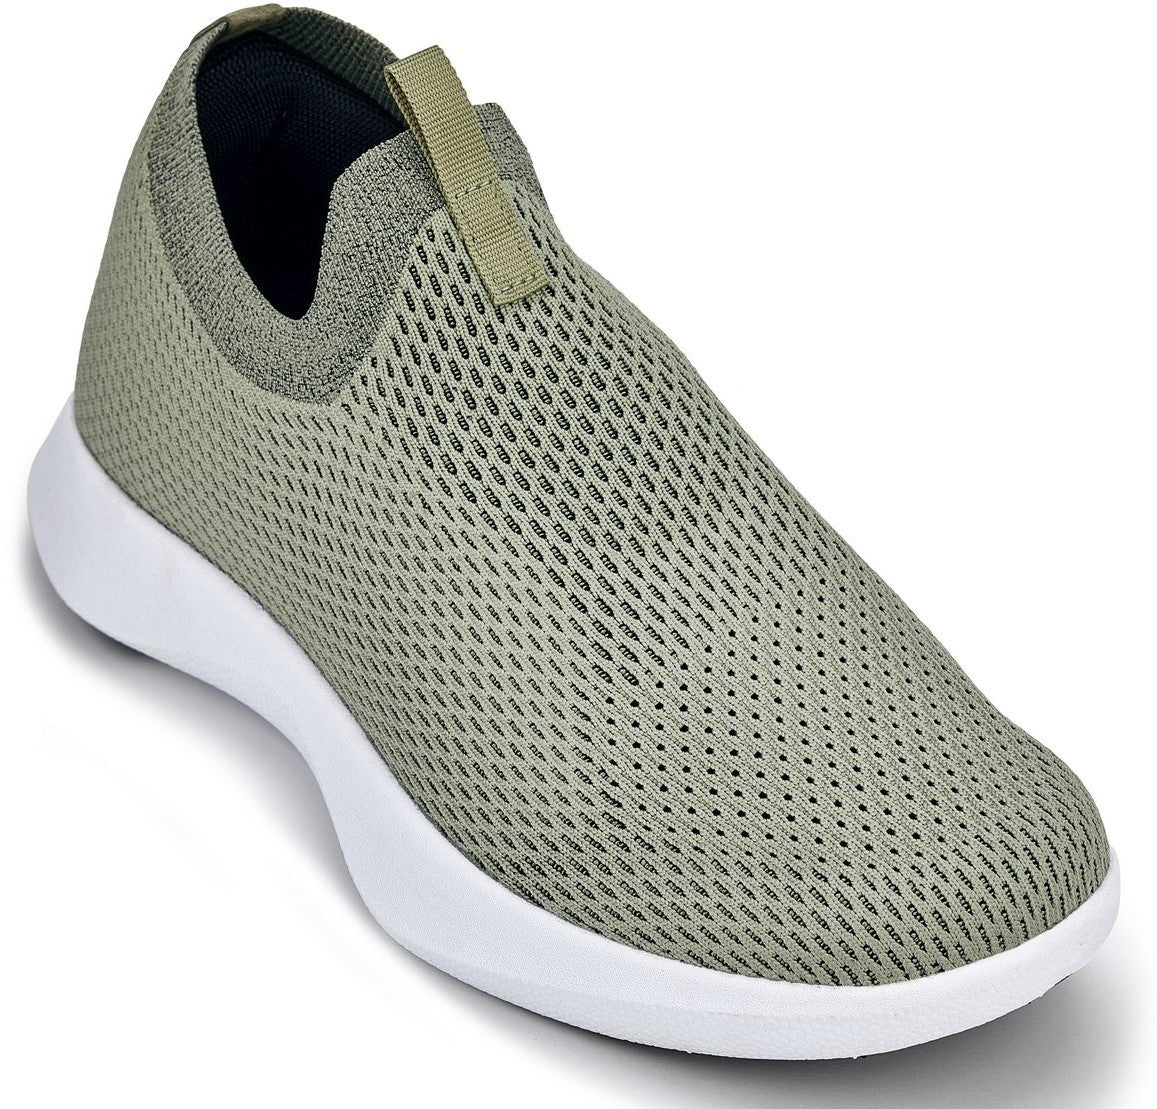 CALTO - Q073 - 2.4 Inches Taller (Olive Green) - Lightweight Slip On Sneakers